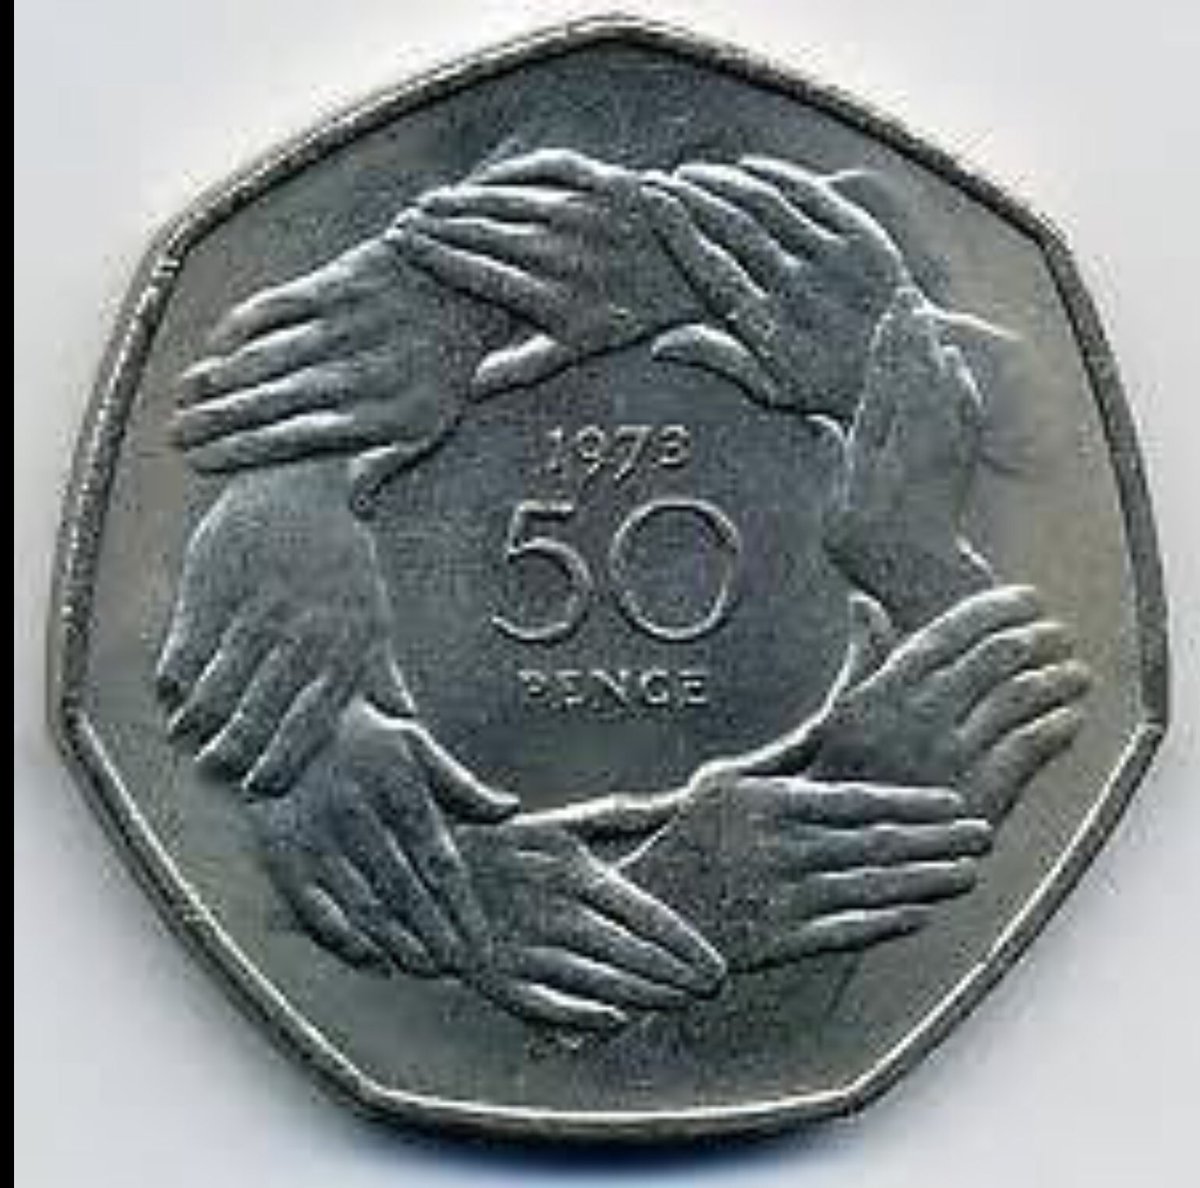 Not wanting to get too heavy about the #Budget18 one point did prompt a memory of my childhood. The old 50p piece celebrating the entry in to the Common Market.  Which according to people back then meant cheaper wine.